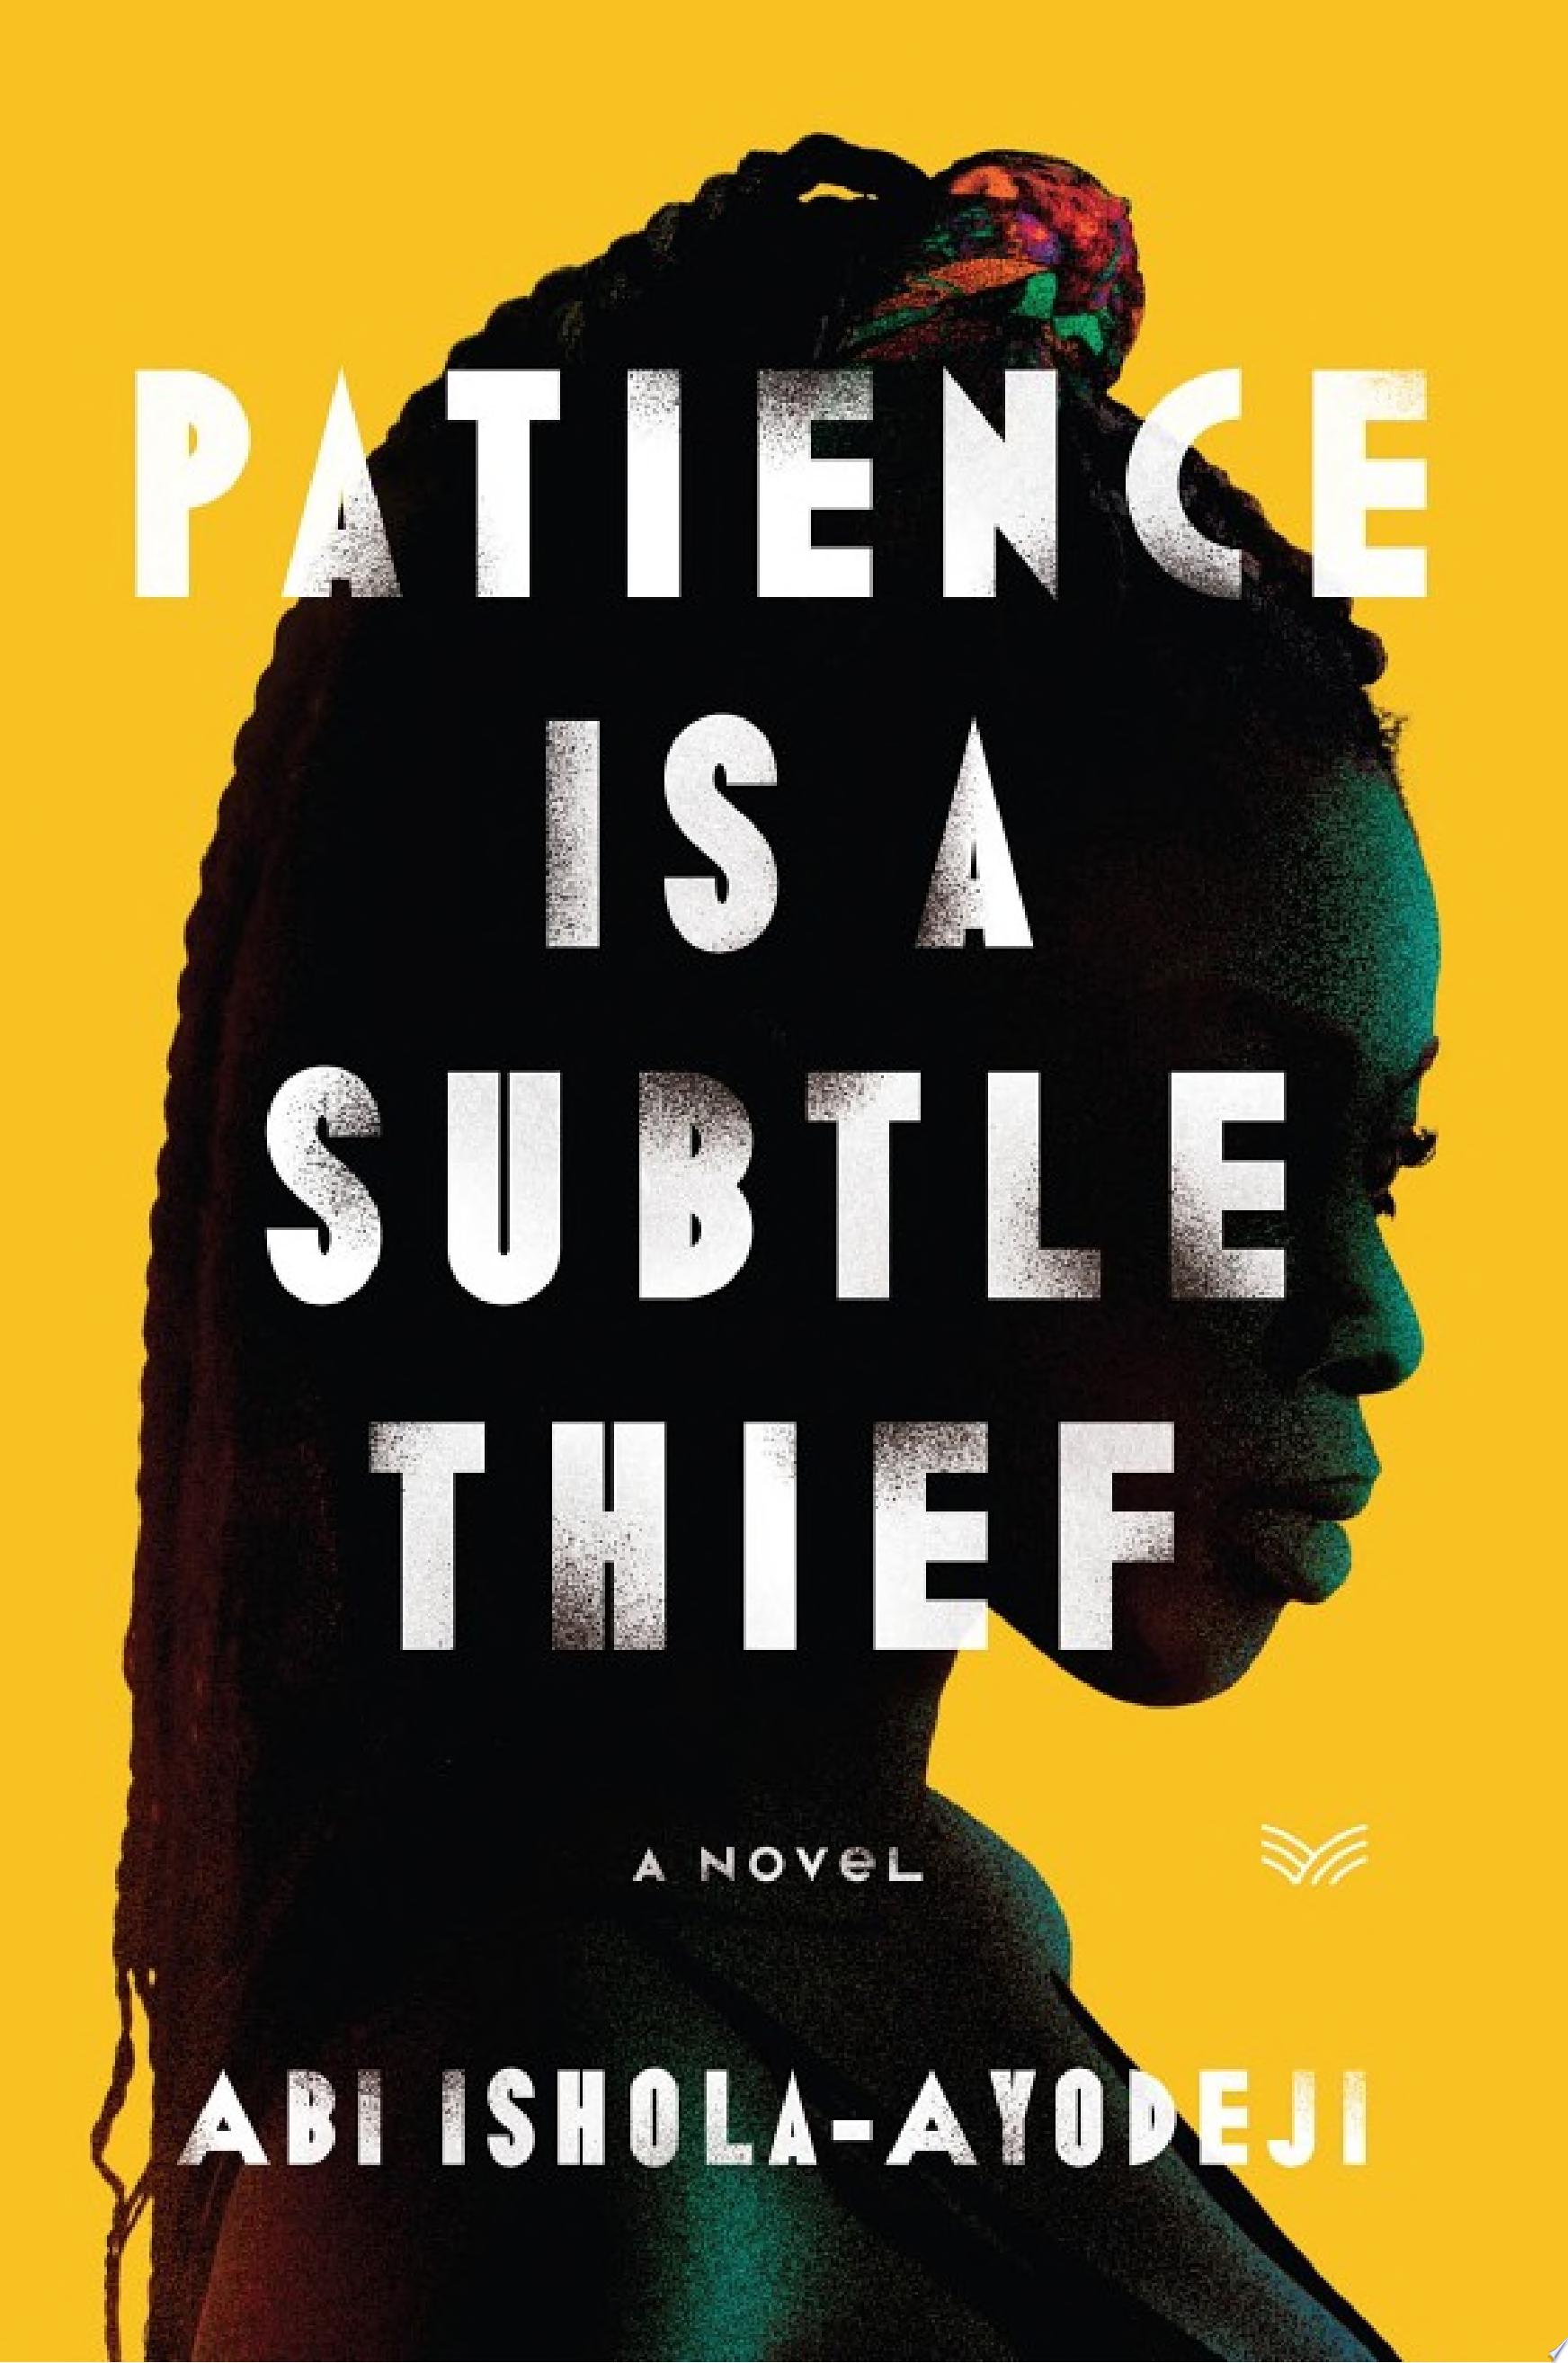 Image for "Patience Is a Subtle Thief"